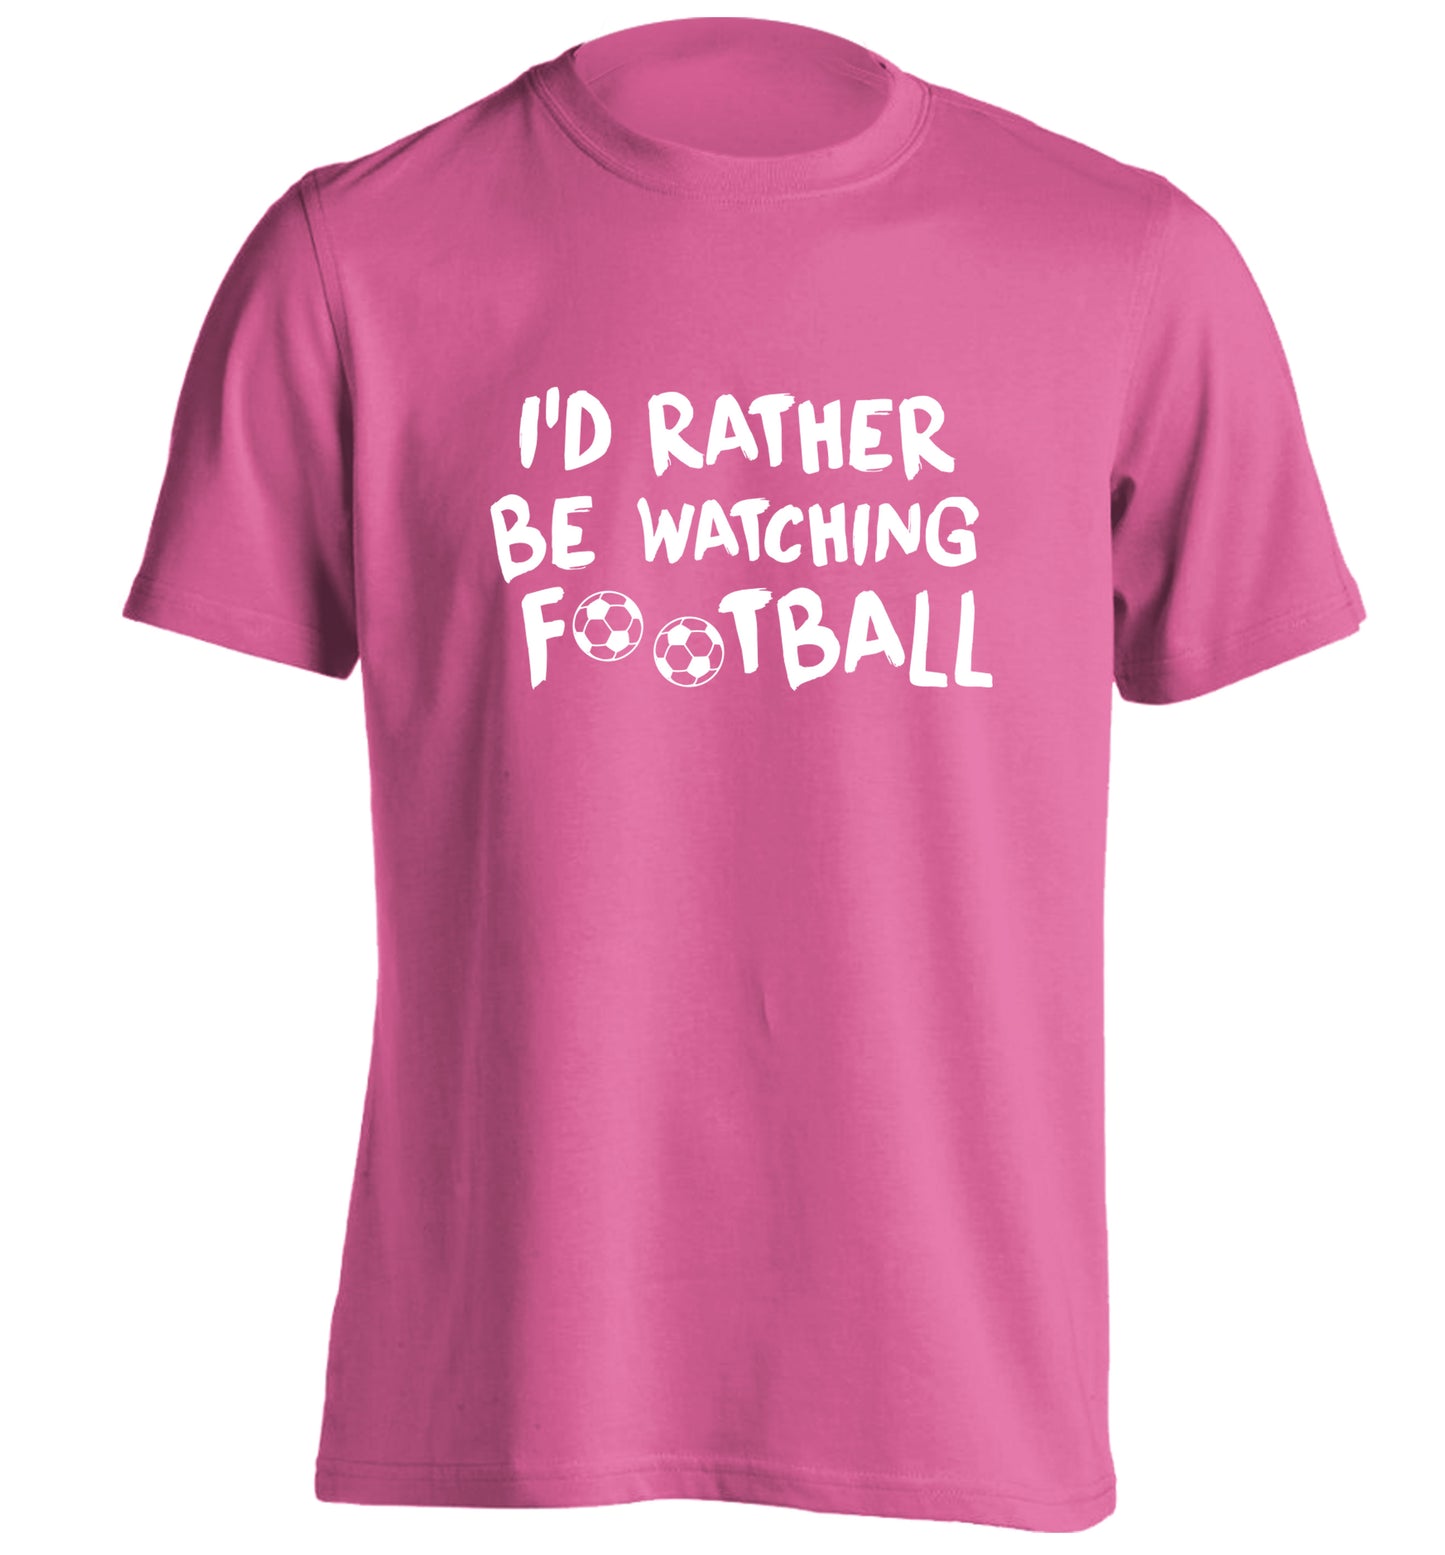 I'd rather be watching football adults unisexpink Tshirt 2XL